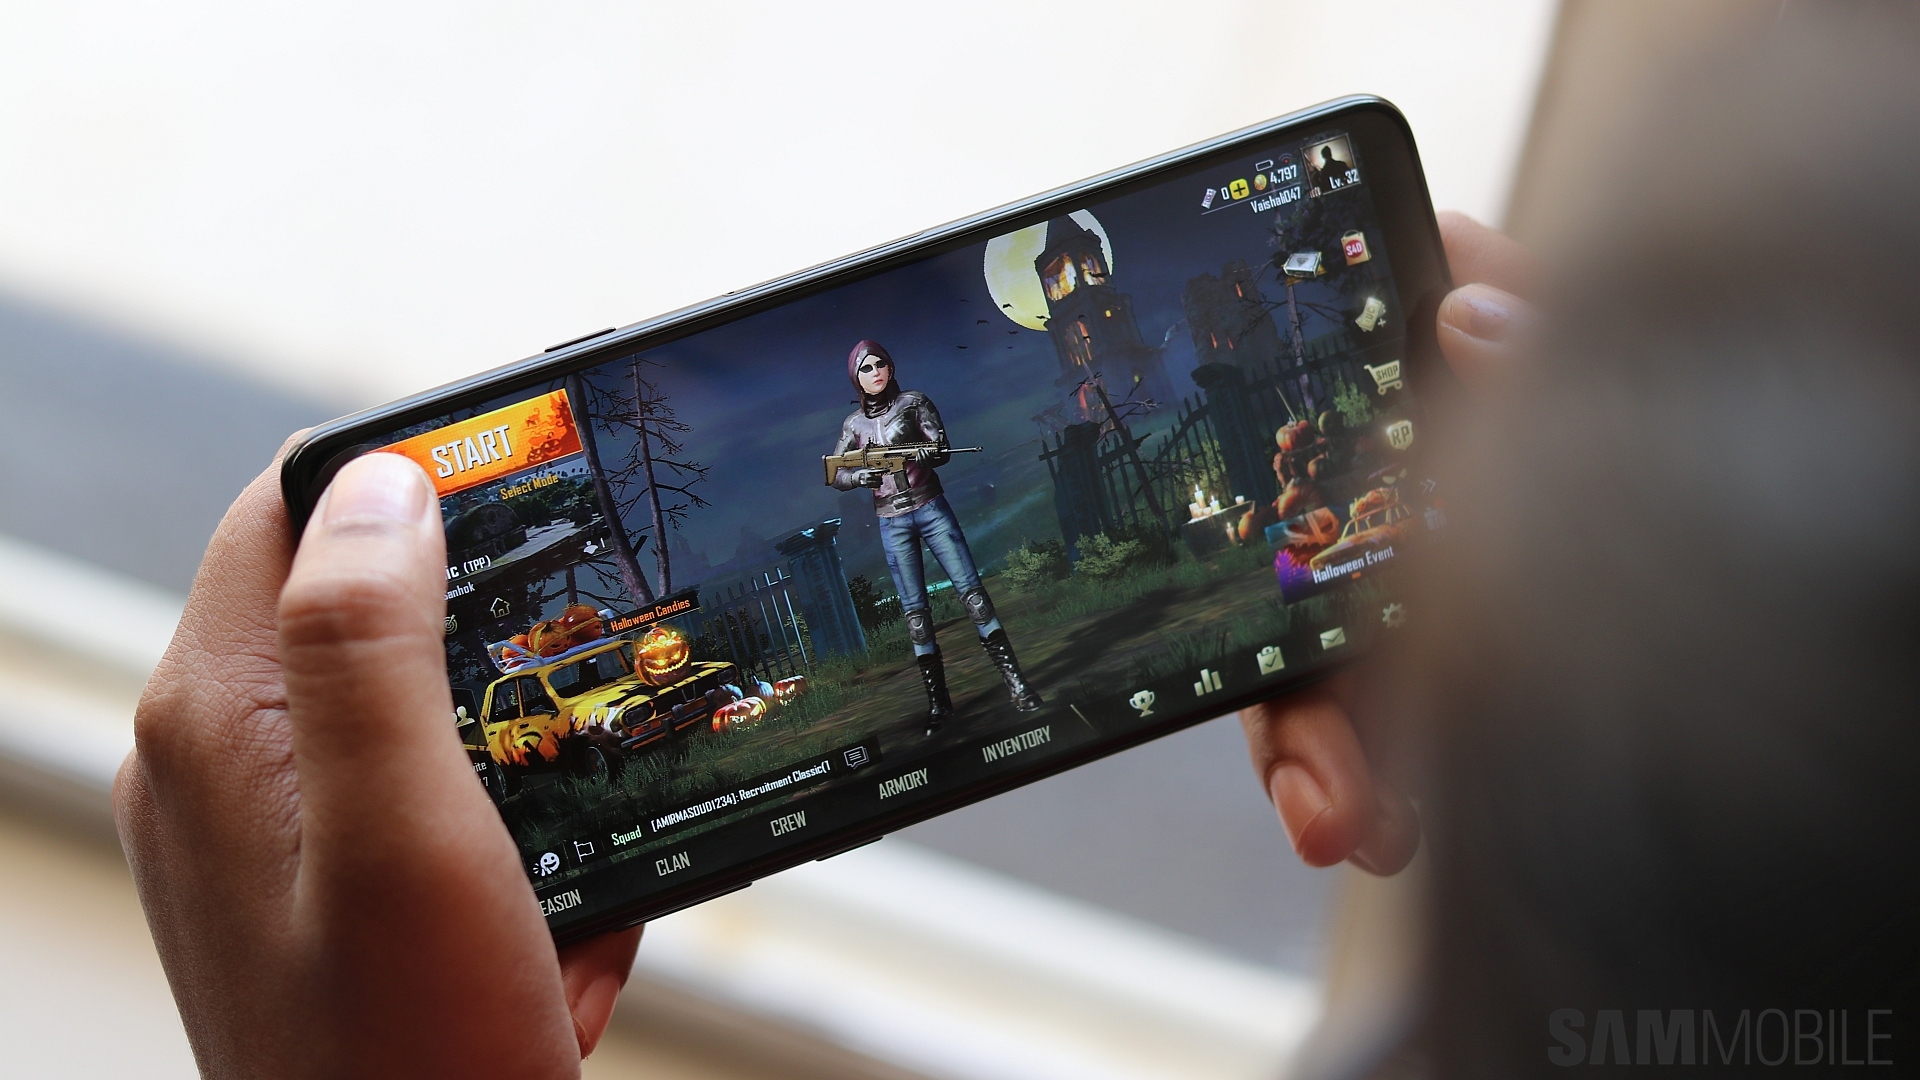 pubg vs fortnite which one are you playing on your galaxy phone sammobile - fortnite or pubg poll